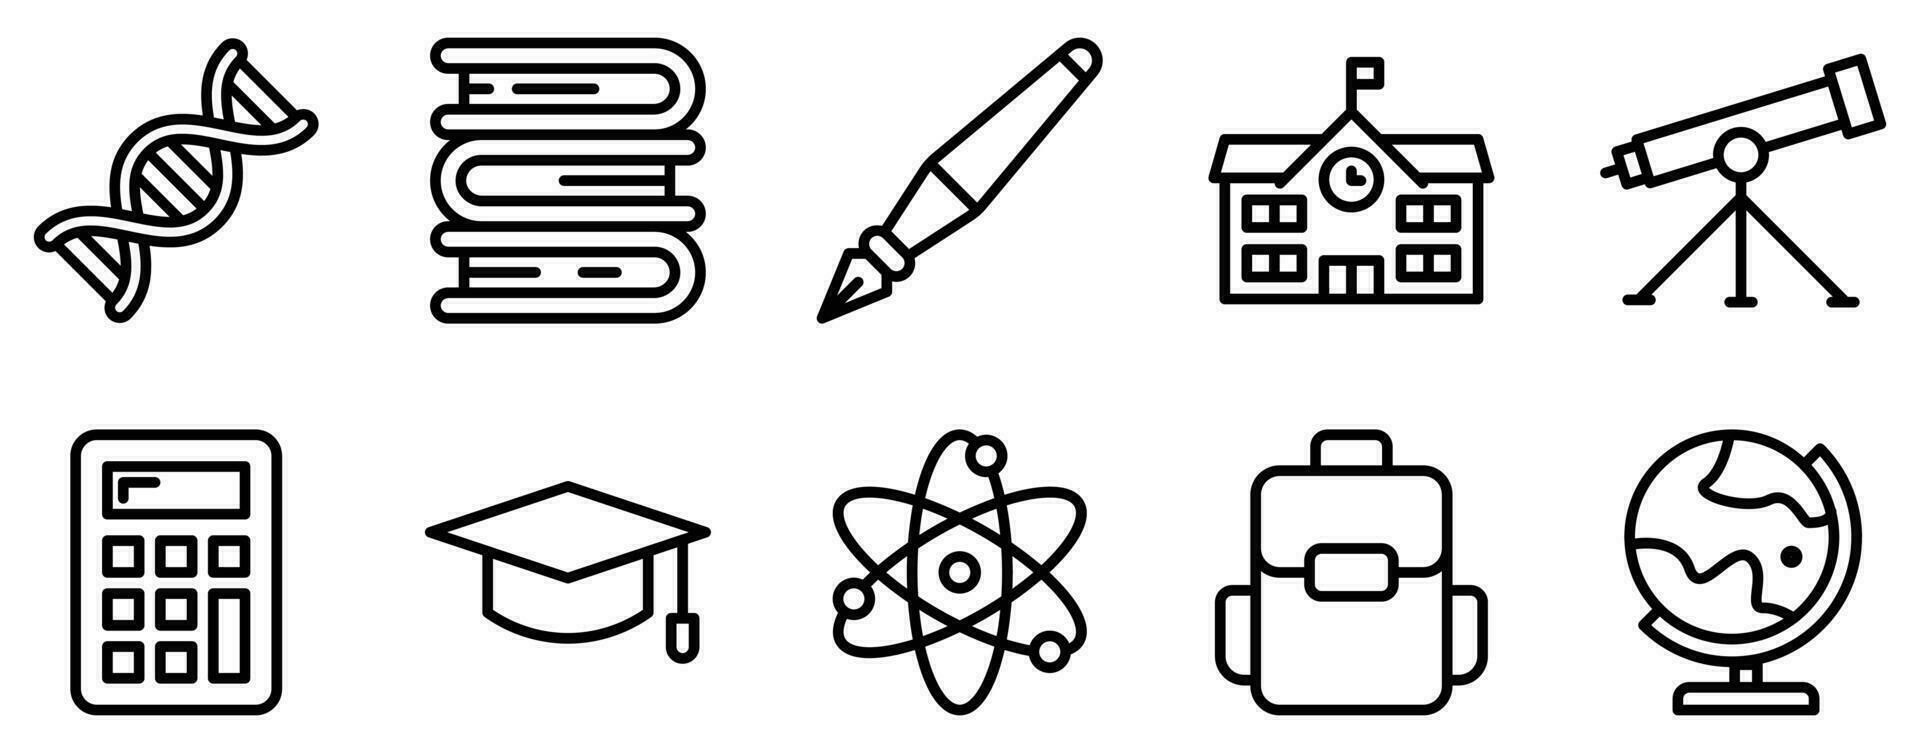 education line style icon collection vector